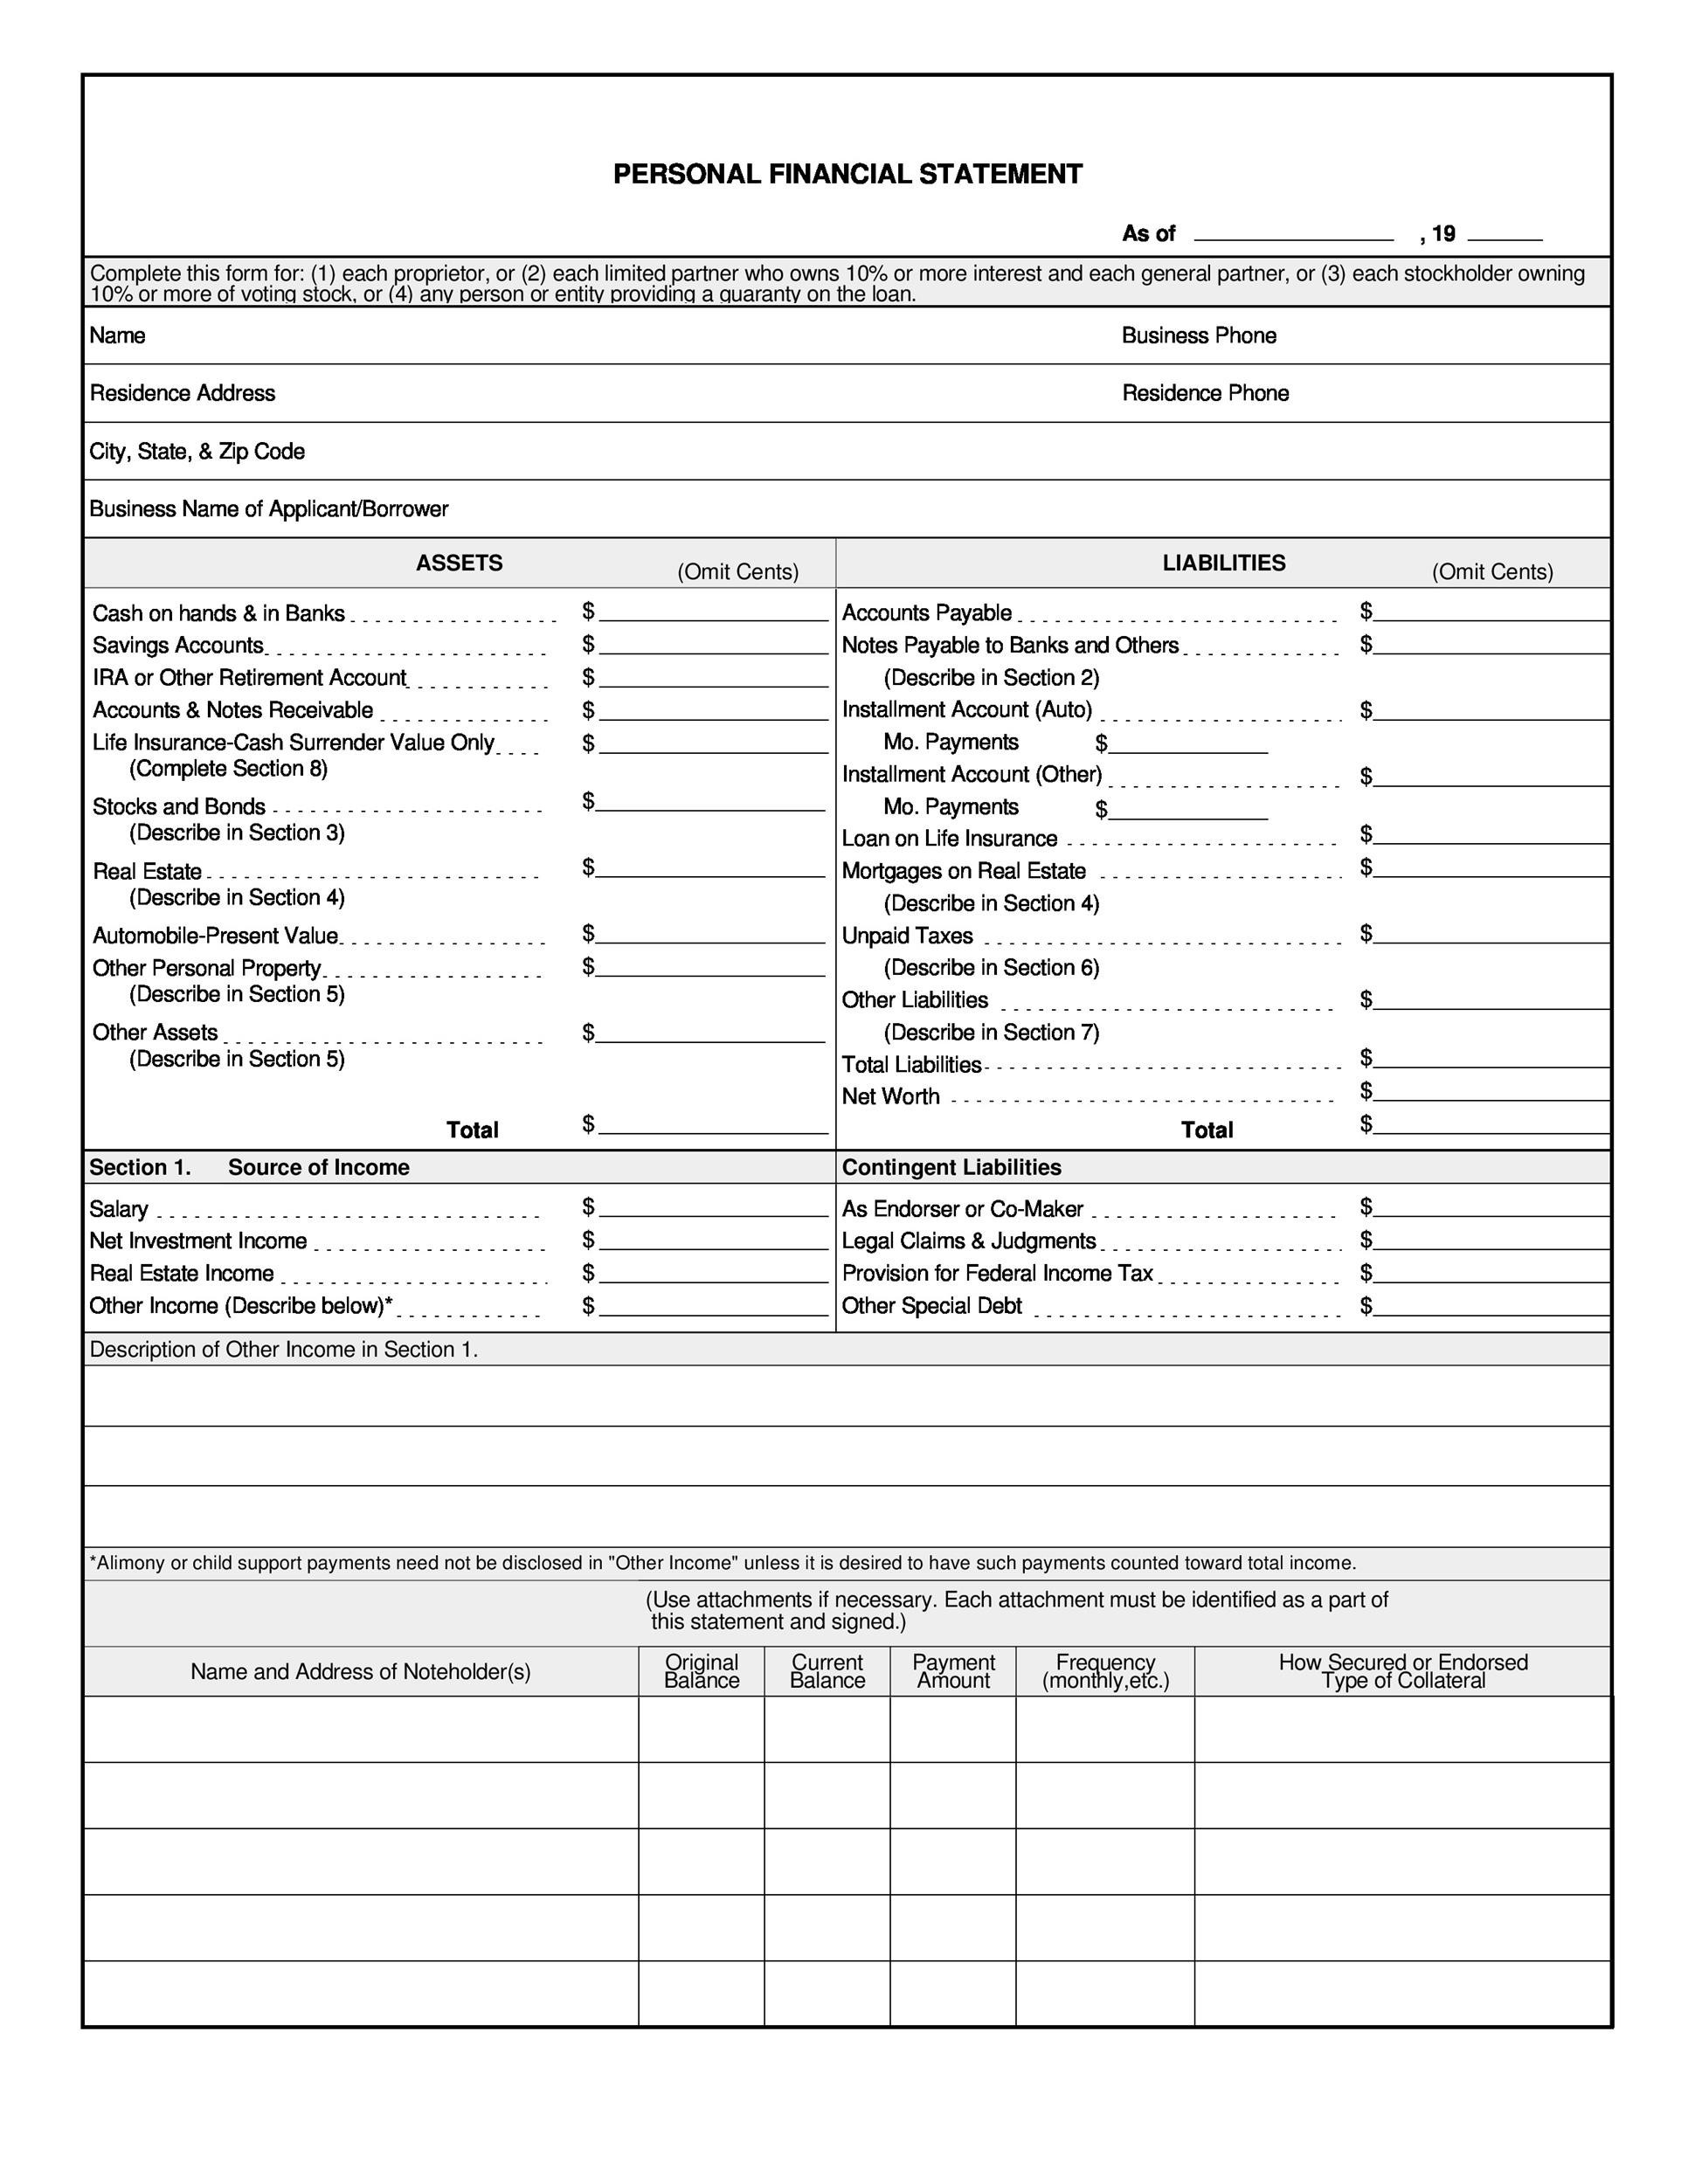 Personal Financial Statement Template Xls Database